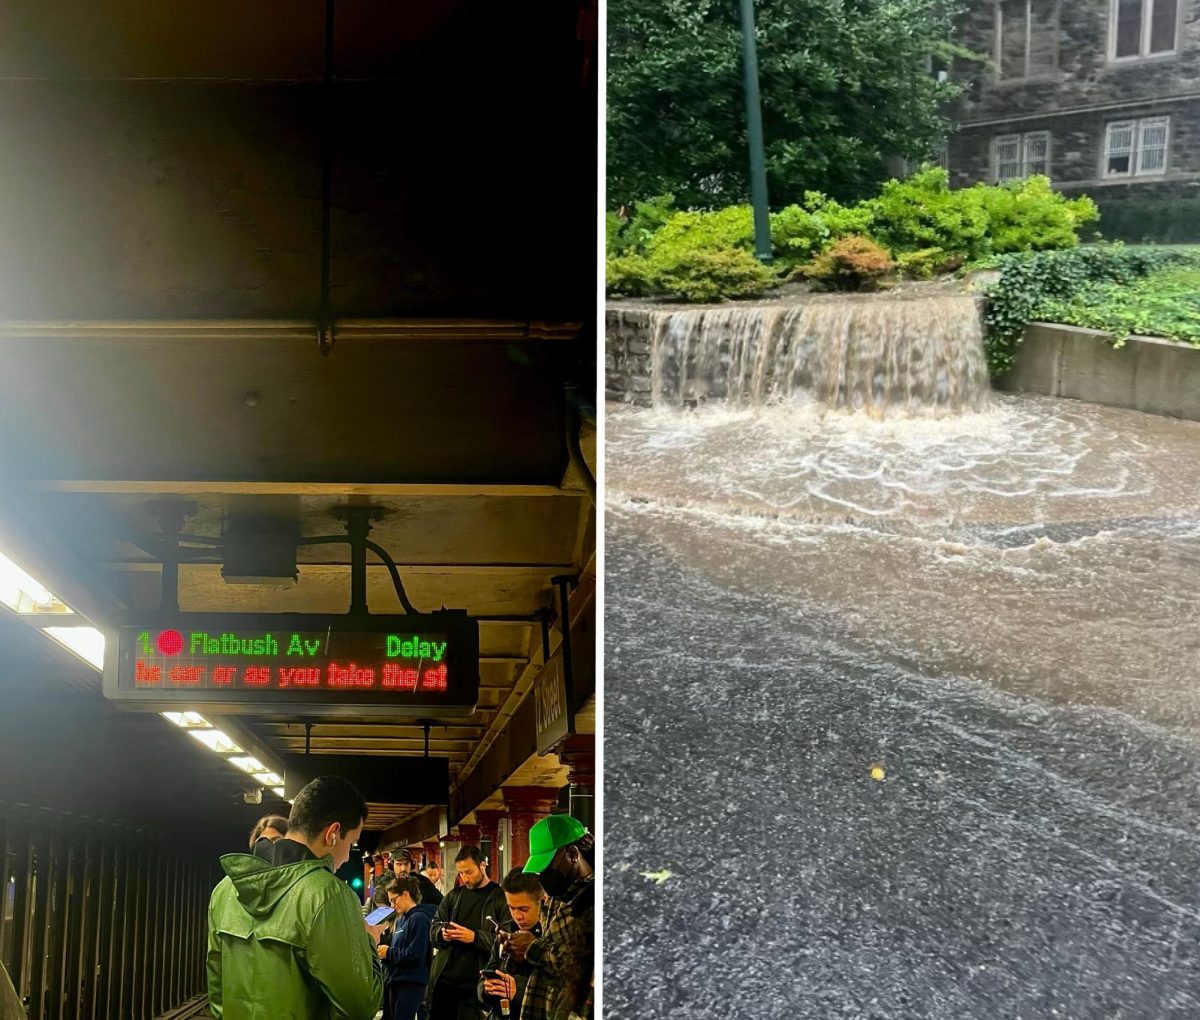 Delays in transportation and flooding throughout New York City affected commutes to campus. 

COURTESY OF CORBIN GREGG AND TEAGAN ANGELL